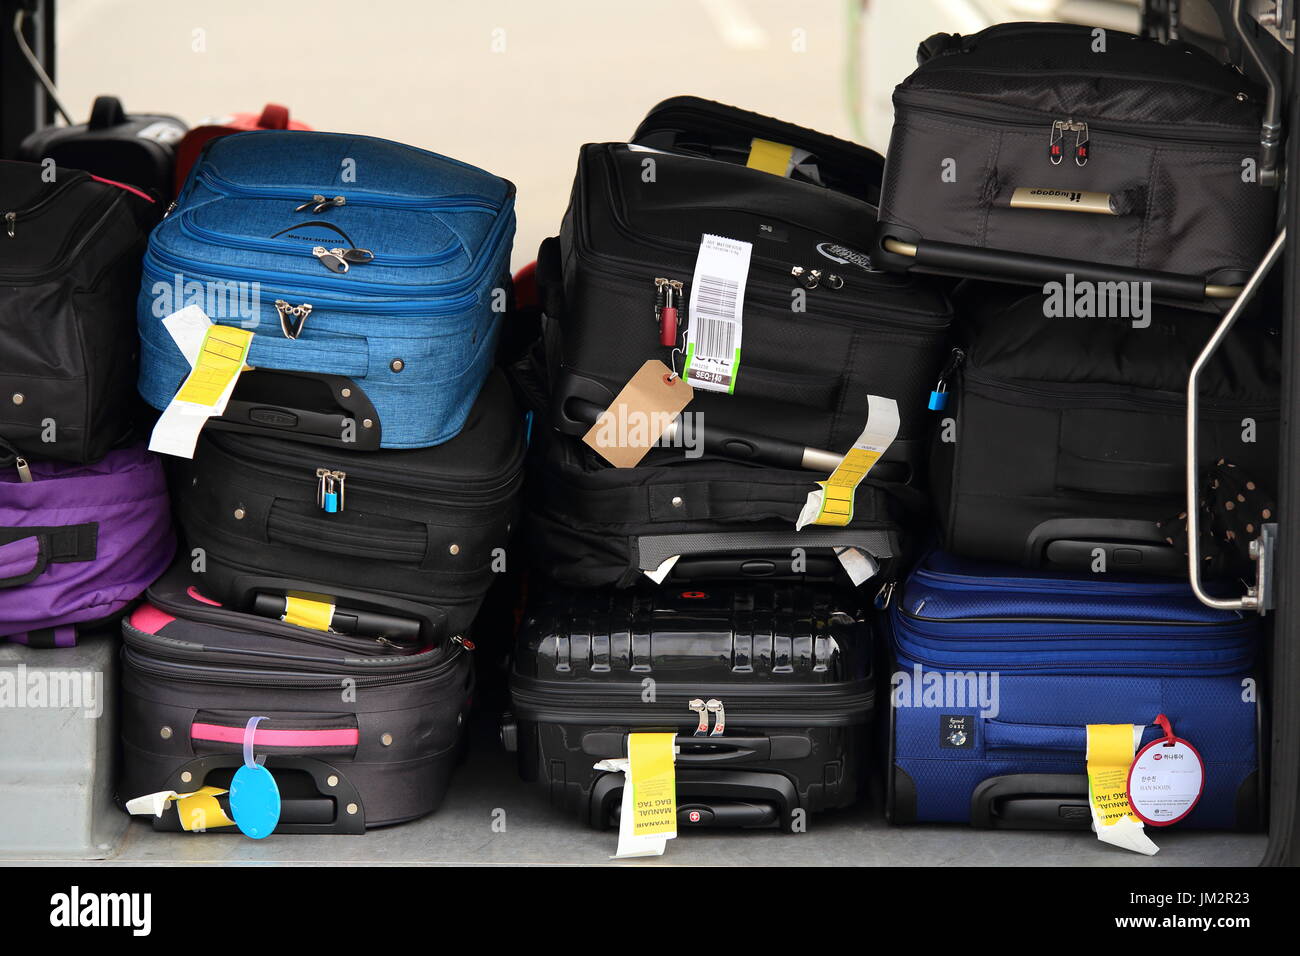 Copenhagen airport, Denmark - July 15, 2017: Passenger luggage in airplane. Colorful suitcases in airplane close-up. Stock Photo